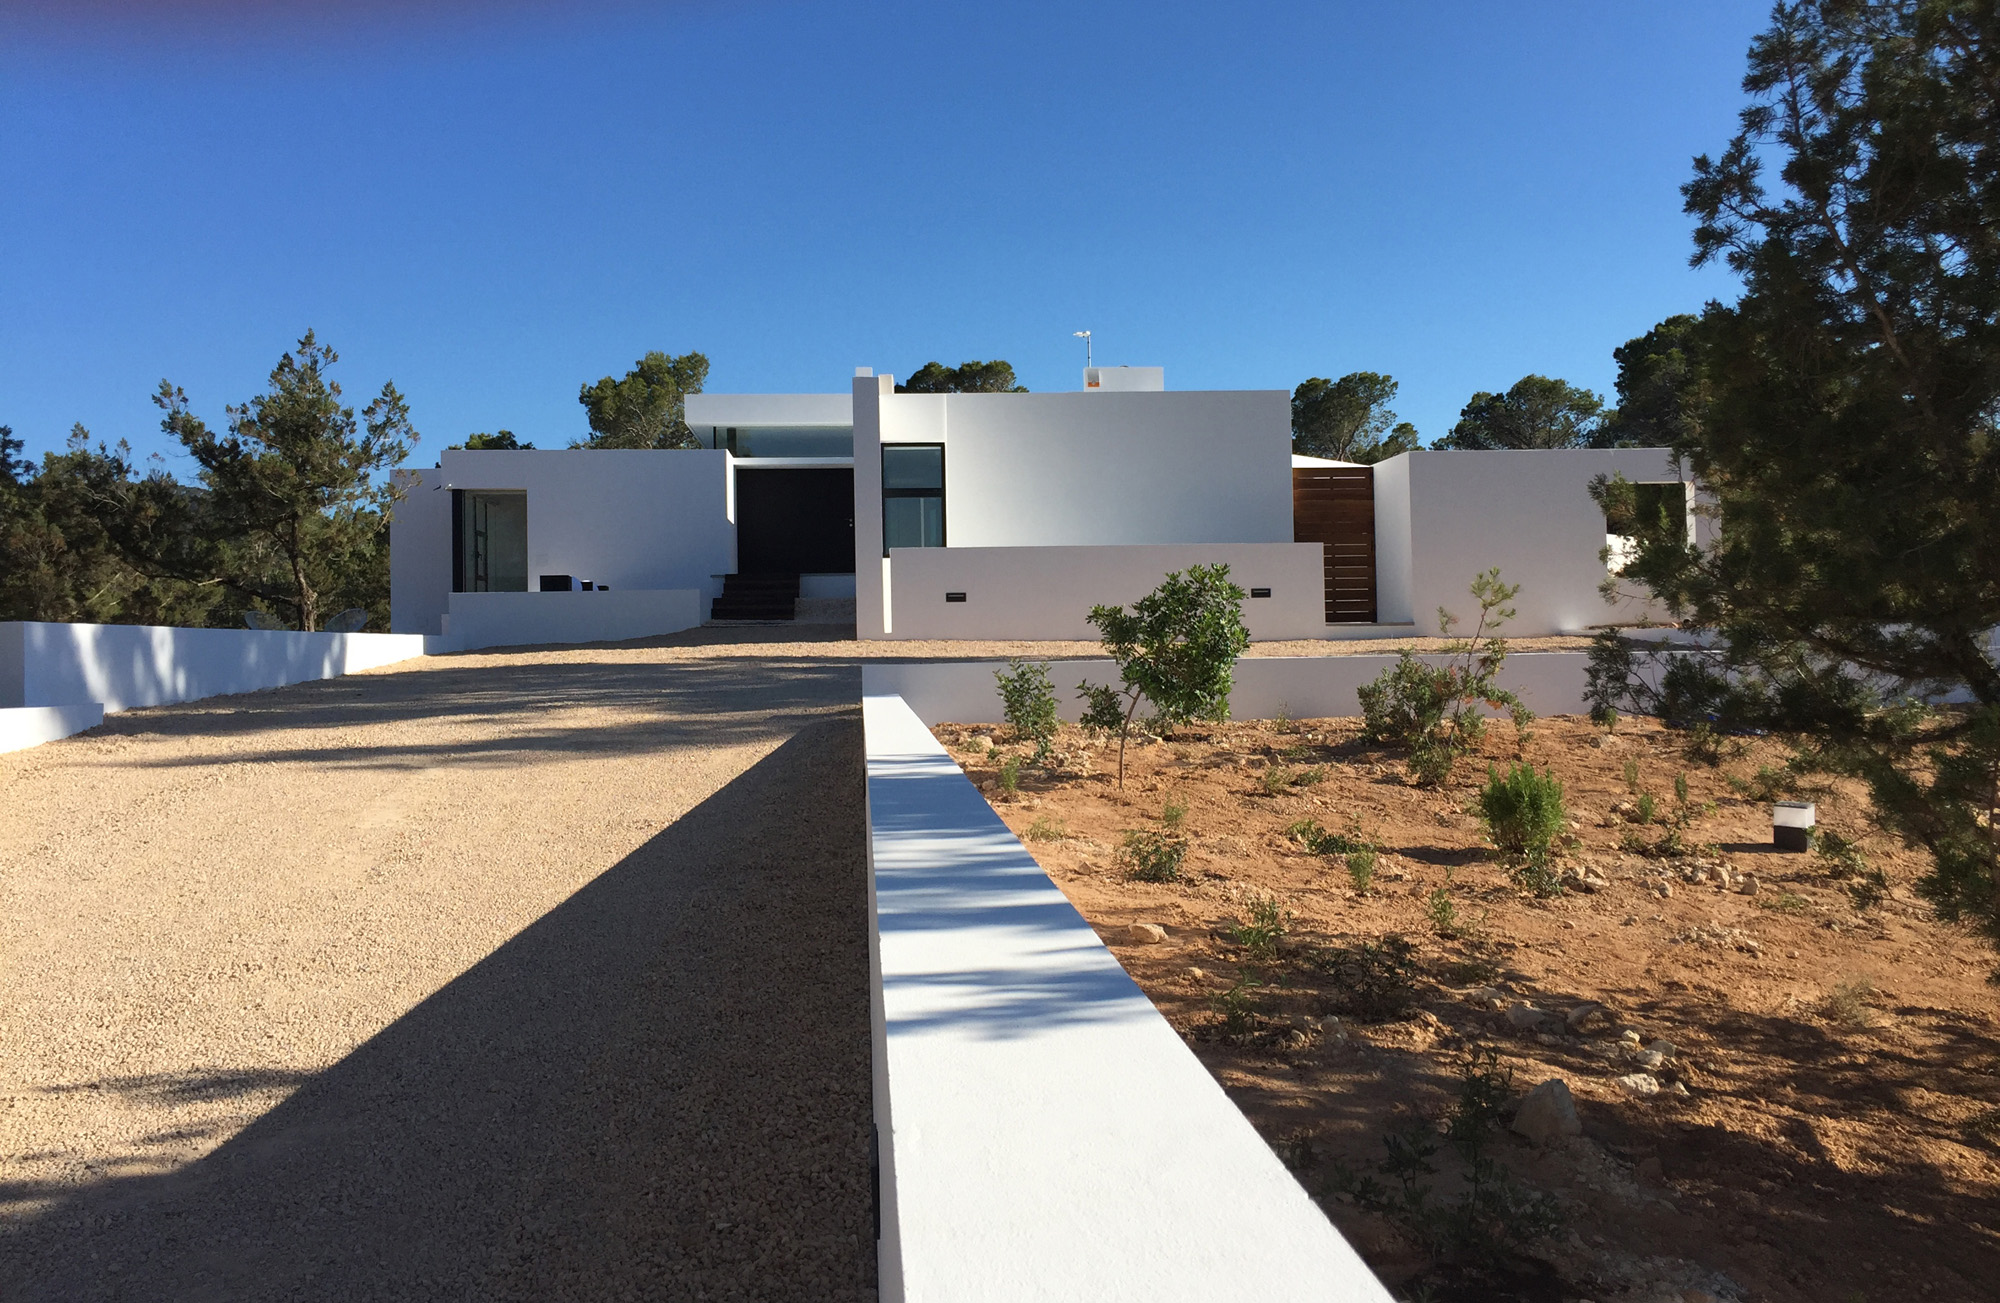 Driveway by Pep Torres - contemporary architecture and design studio in Ibiza